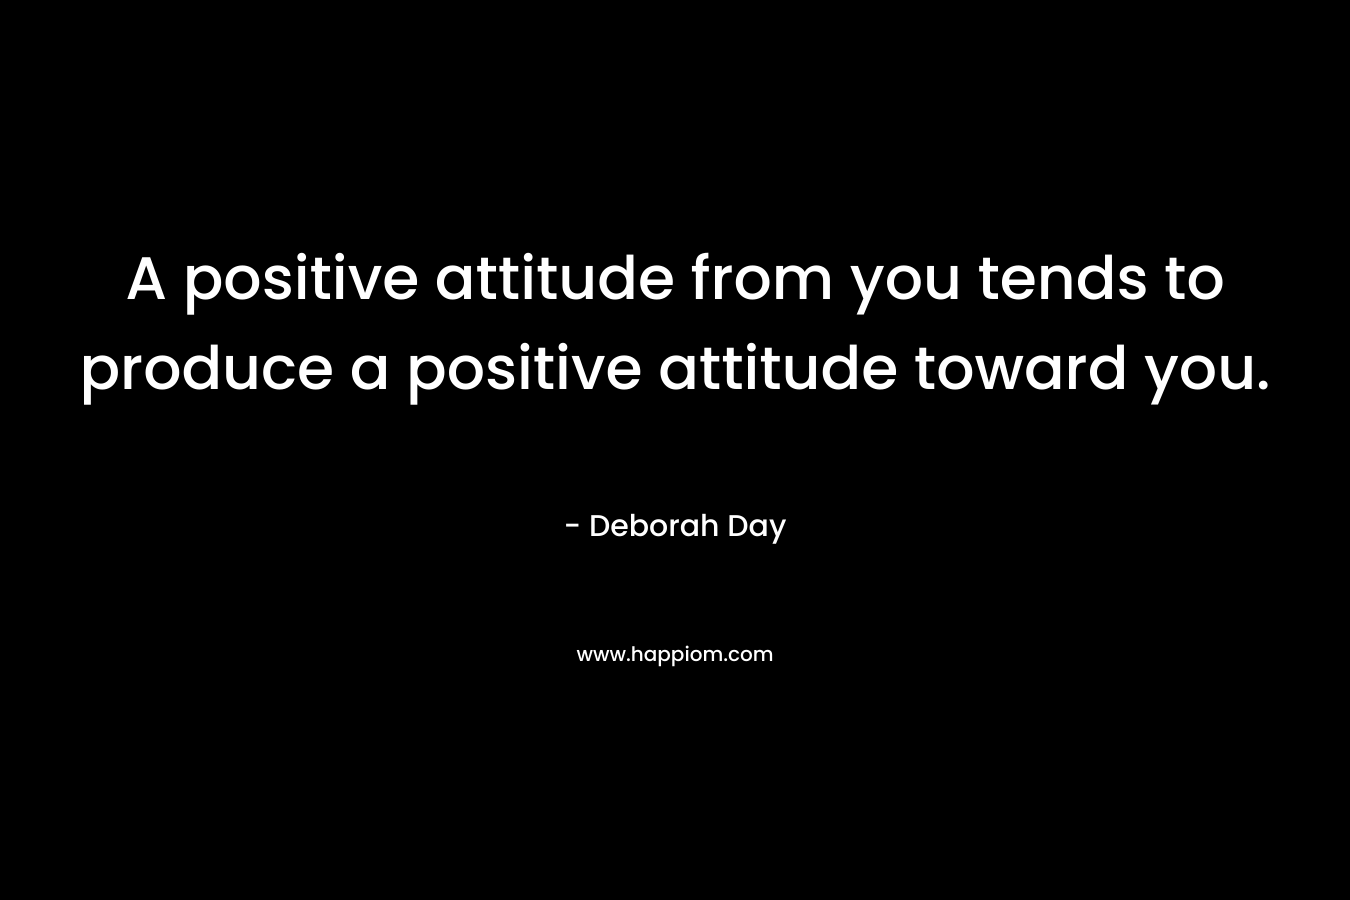 A positive attitude from you tends to produce a positive attitude toward you.